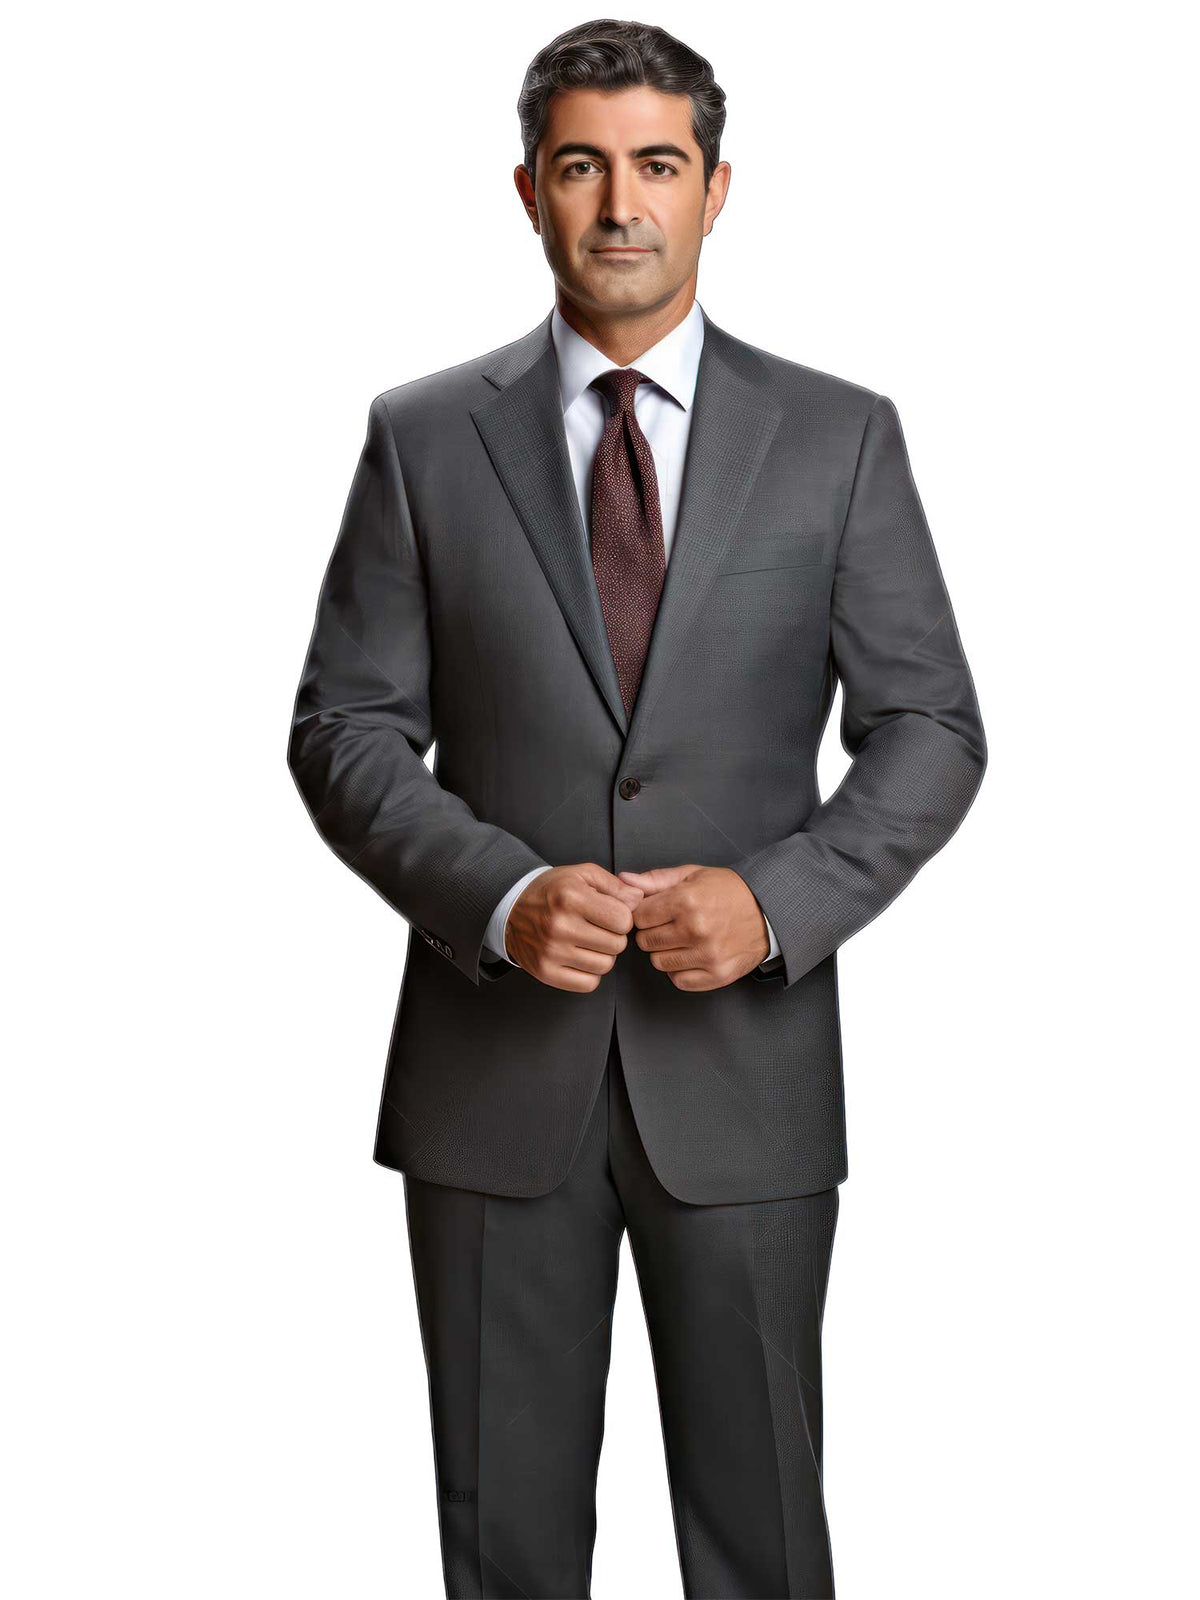 C1-Charcoal Abram Travel Jacket (Sold Separately)  https://harrysformenswear.com.au/products/c1-charcoal-abram-travel-jacket-sold-separately  C-1-Charcoal Jacket, Our Premium High Fashion Charcoal Suit Jacket in a Luxurious Europen " Textured Finish" with a choice of two fit Trousers, Jesse (Slim Fit) or Noah (Tailored Fit) along with a matching Waist Coat in a Contemporary fit. The Perfect 3Pcs Suit for a perfect fit. Abram Style Jacket in a Contemporar…